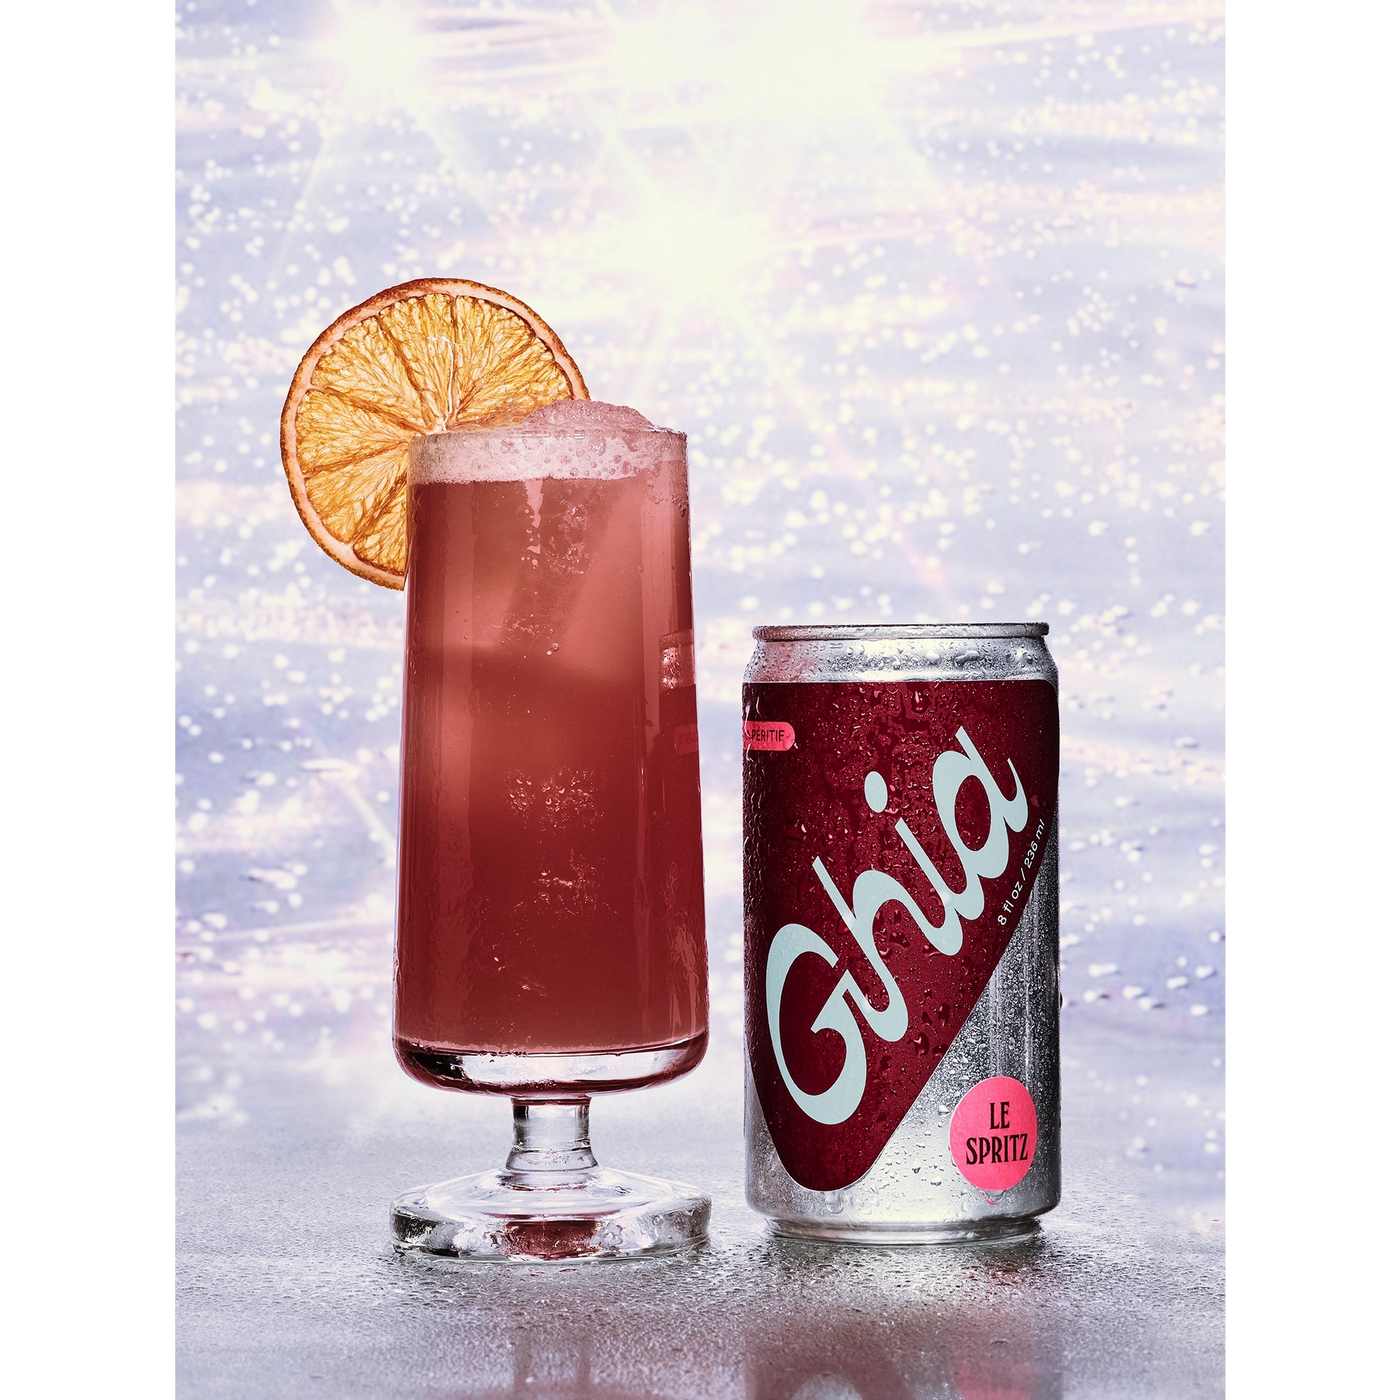 Delicious Alcohol Free Drink Ghia Le Spritz Soda Non-Alcoholic Spritz available at The Sobr Market in Winnipeg Canada - vegan, kosher, nothing artificial, gluten free - delicious alcohol free beverage with adaptogens